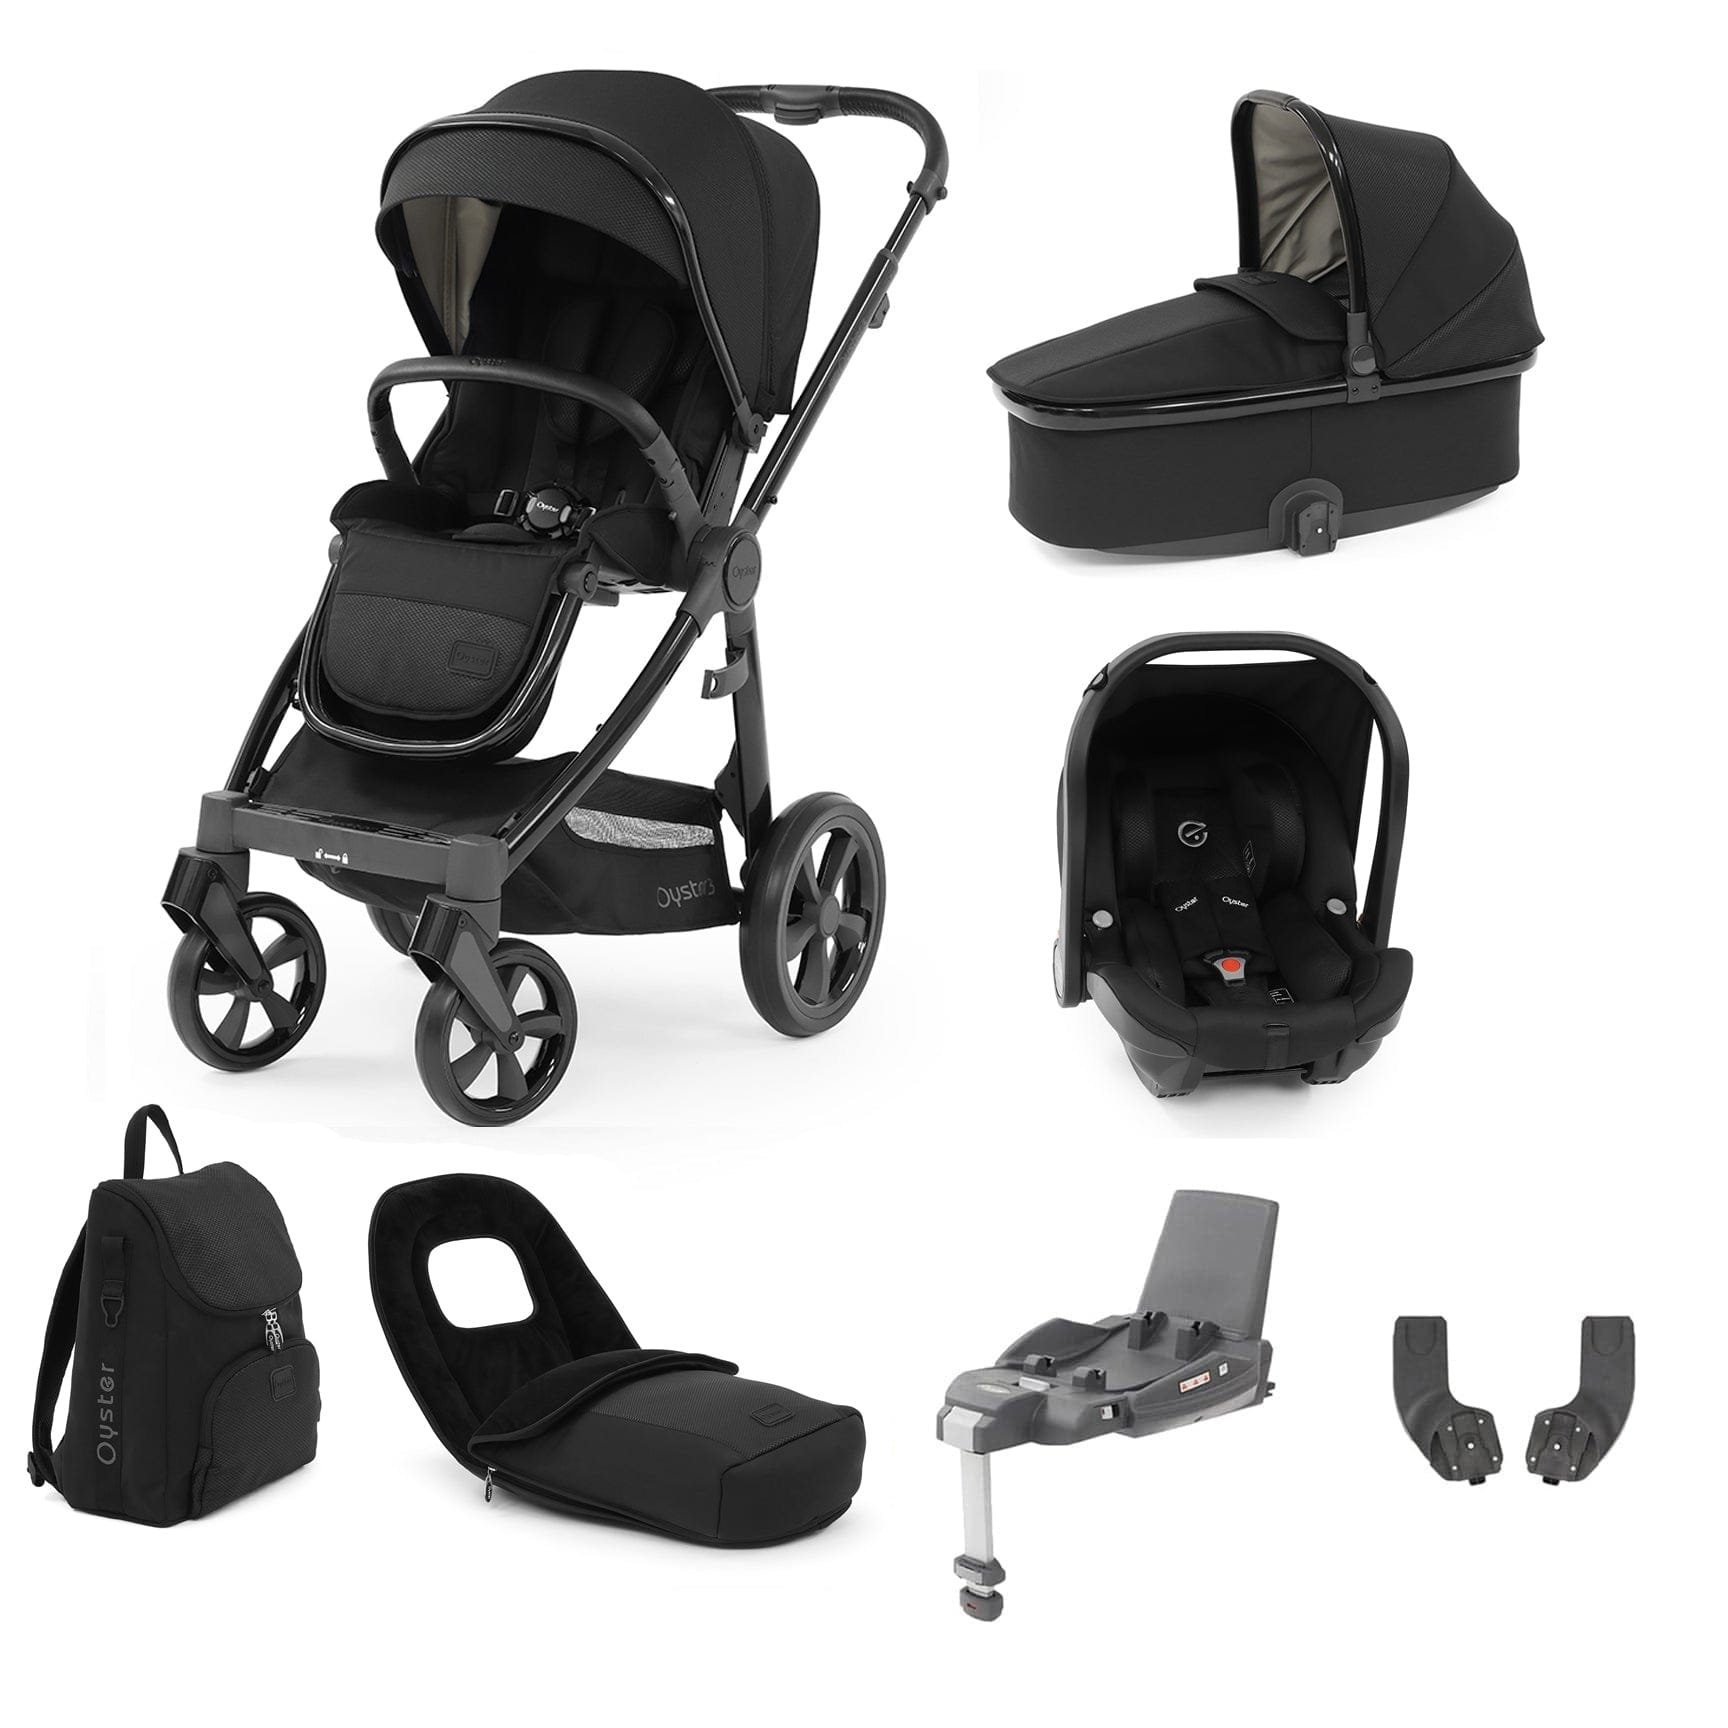 Babystyle Oyster 3 Luxury 7 Piece with Car Seat Bundle in Pixel Travel Systems 14775-PXL 5060711565668